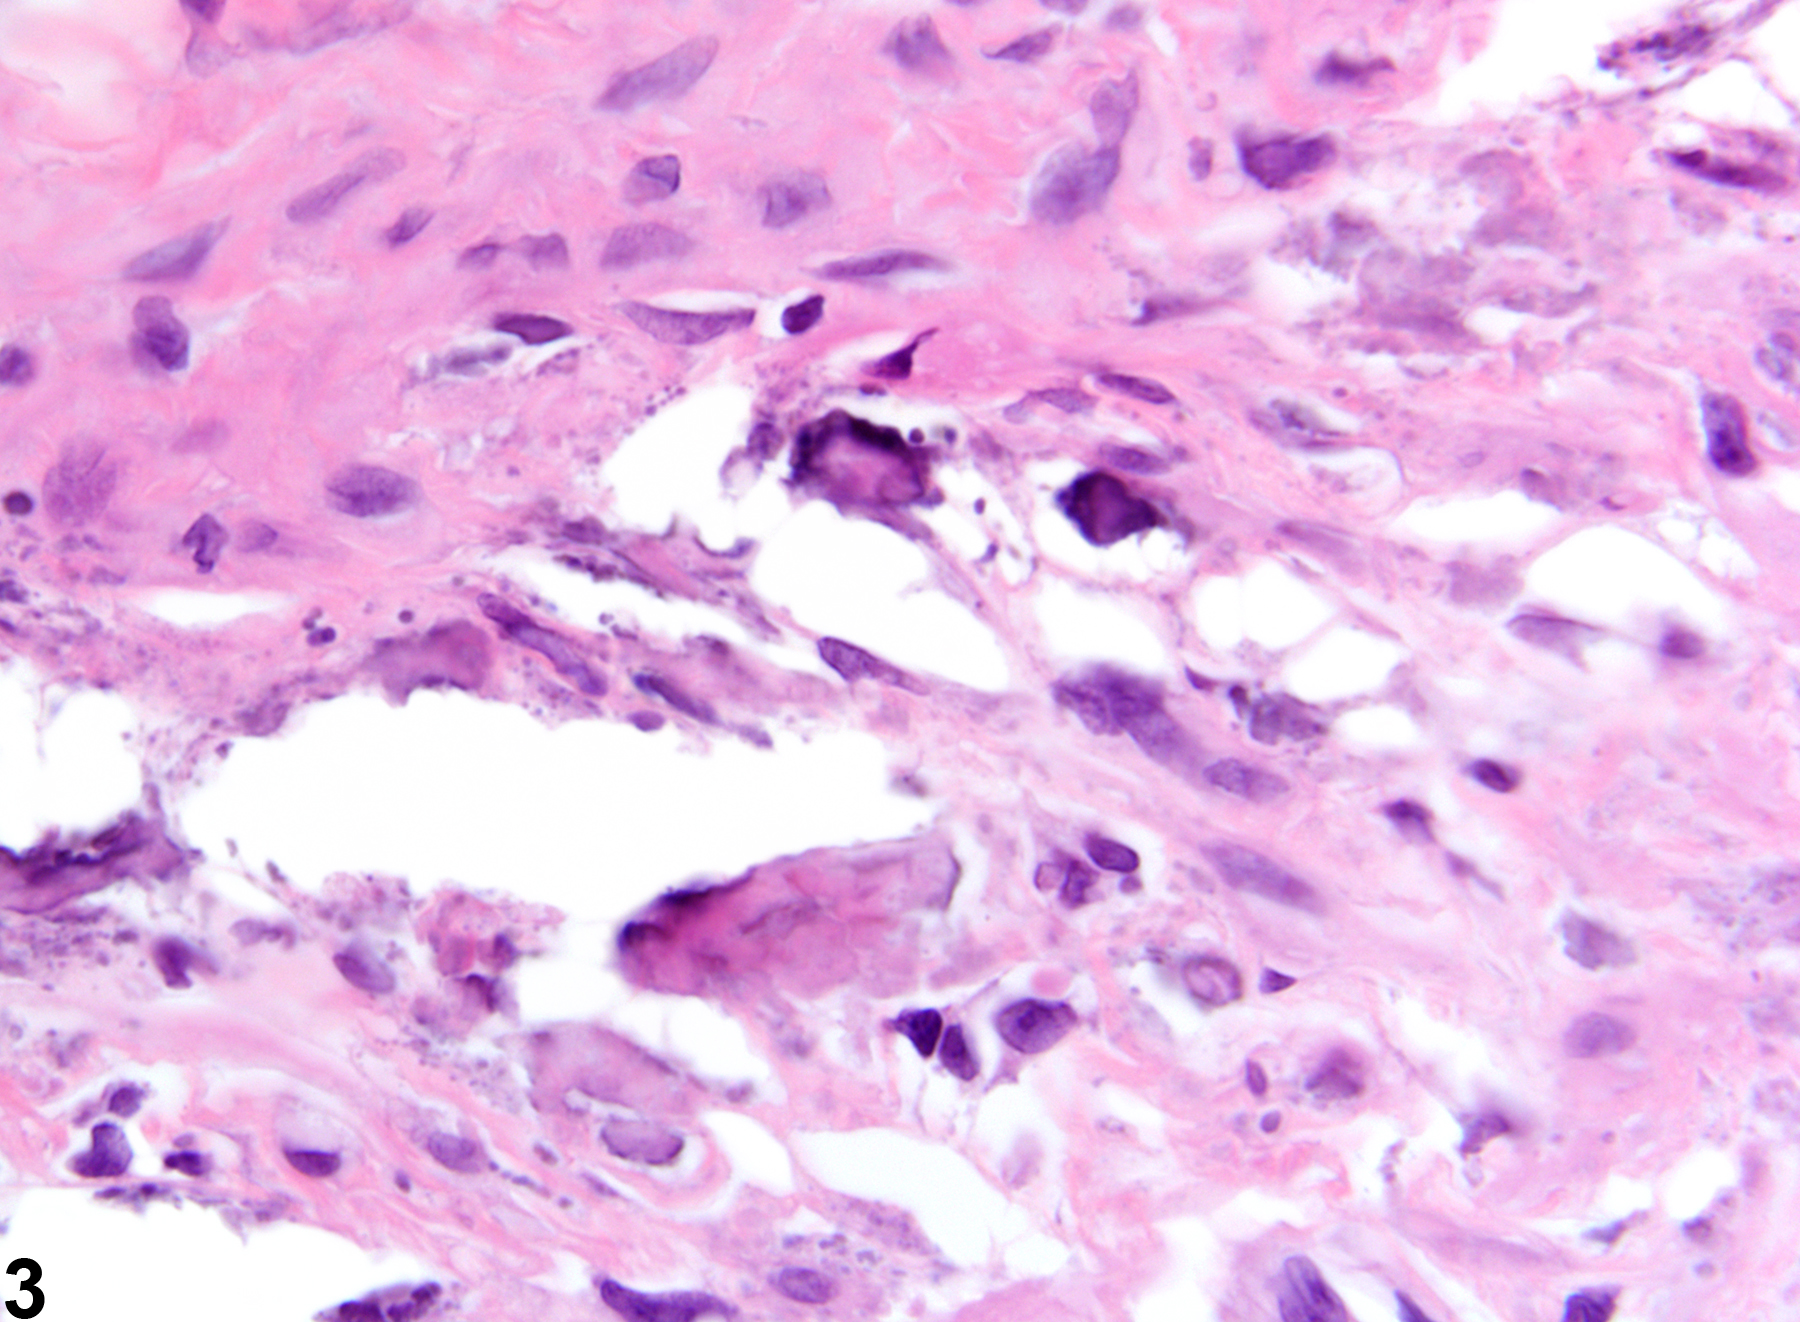 Image of mineralization in the seminal vesicle from a male F344/N rat in an chronic study